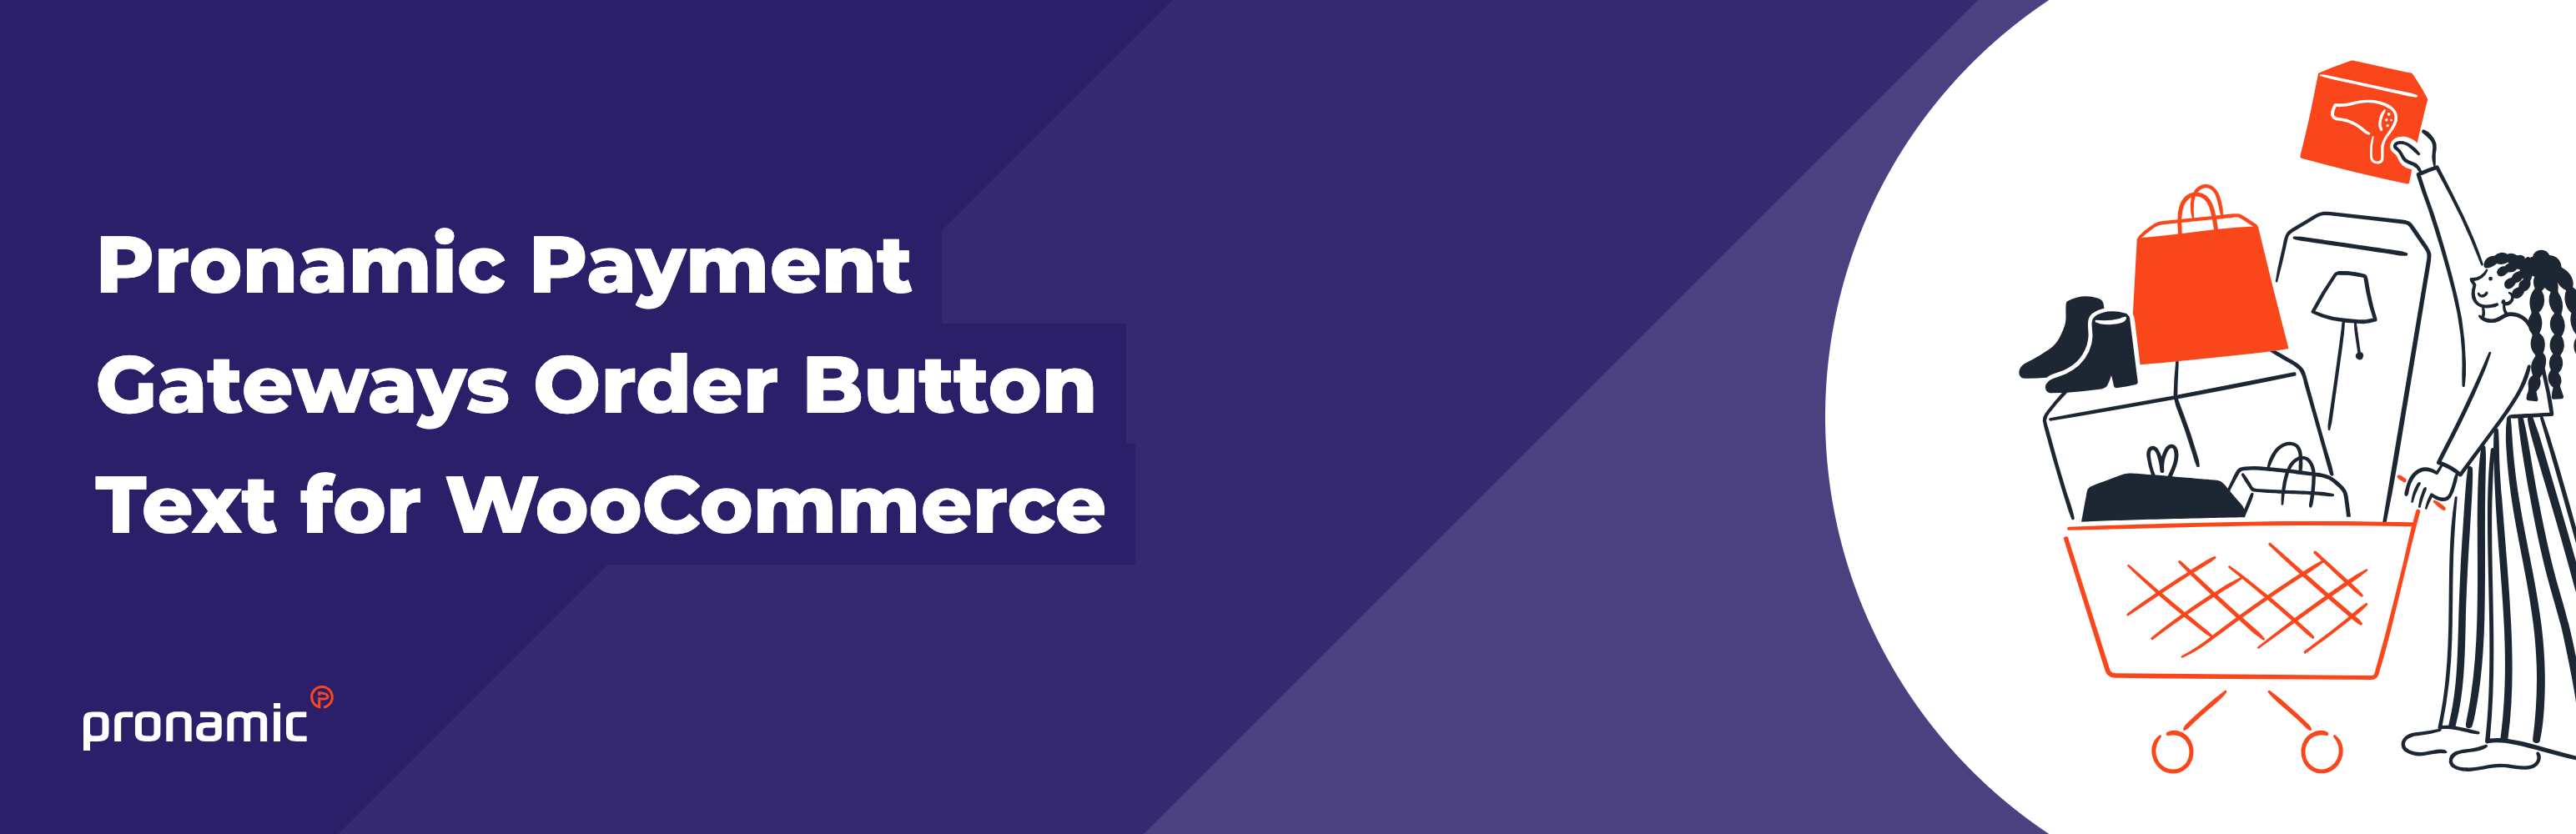 Pronamic Payment Gateways Order Button Text for WooCommerce